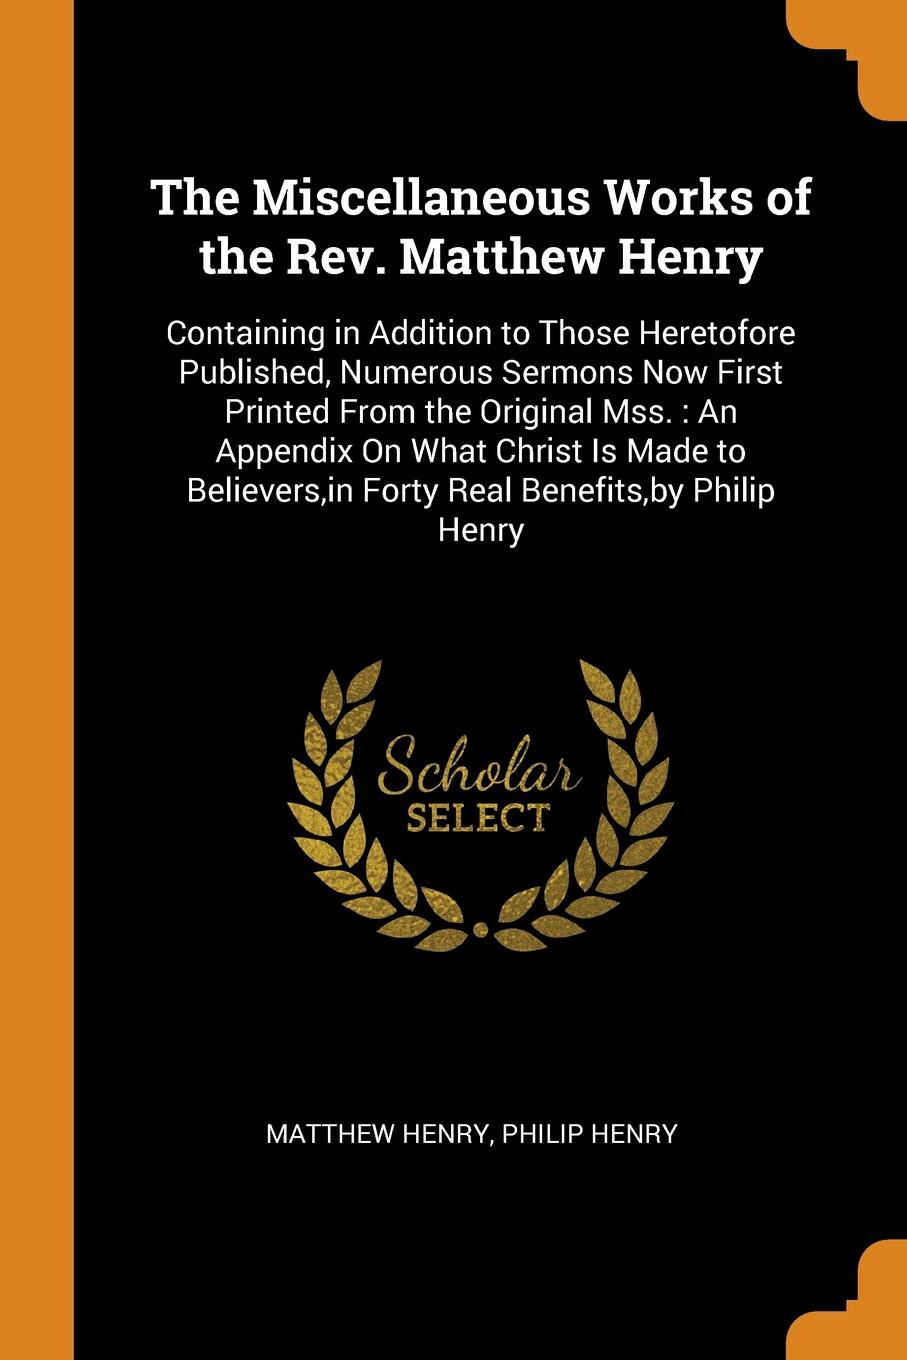 The Miscellaneous Works of the Rev. Matthew Henry. Containing in Addition to Those Heretofore Published, Numerous Sermons Now First Printed From the Original Mss. : An Appendix On What Christ Is Made to Believers,in Forty Real Benefits,by Philip H...